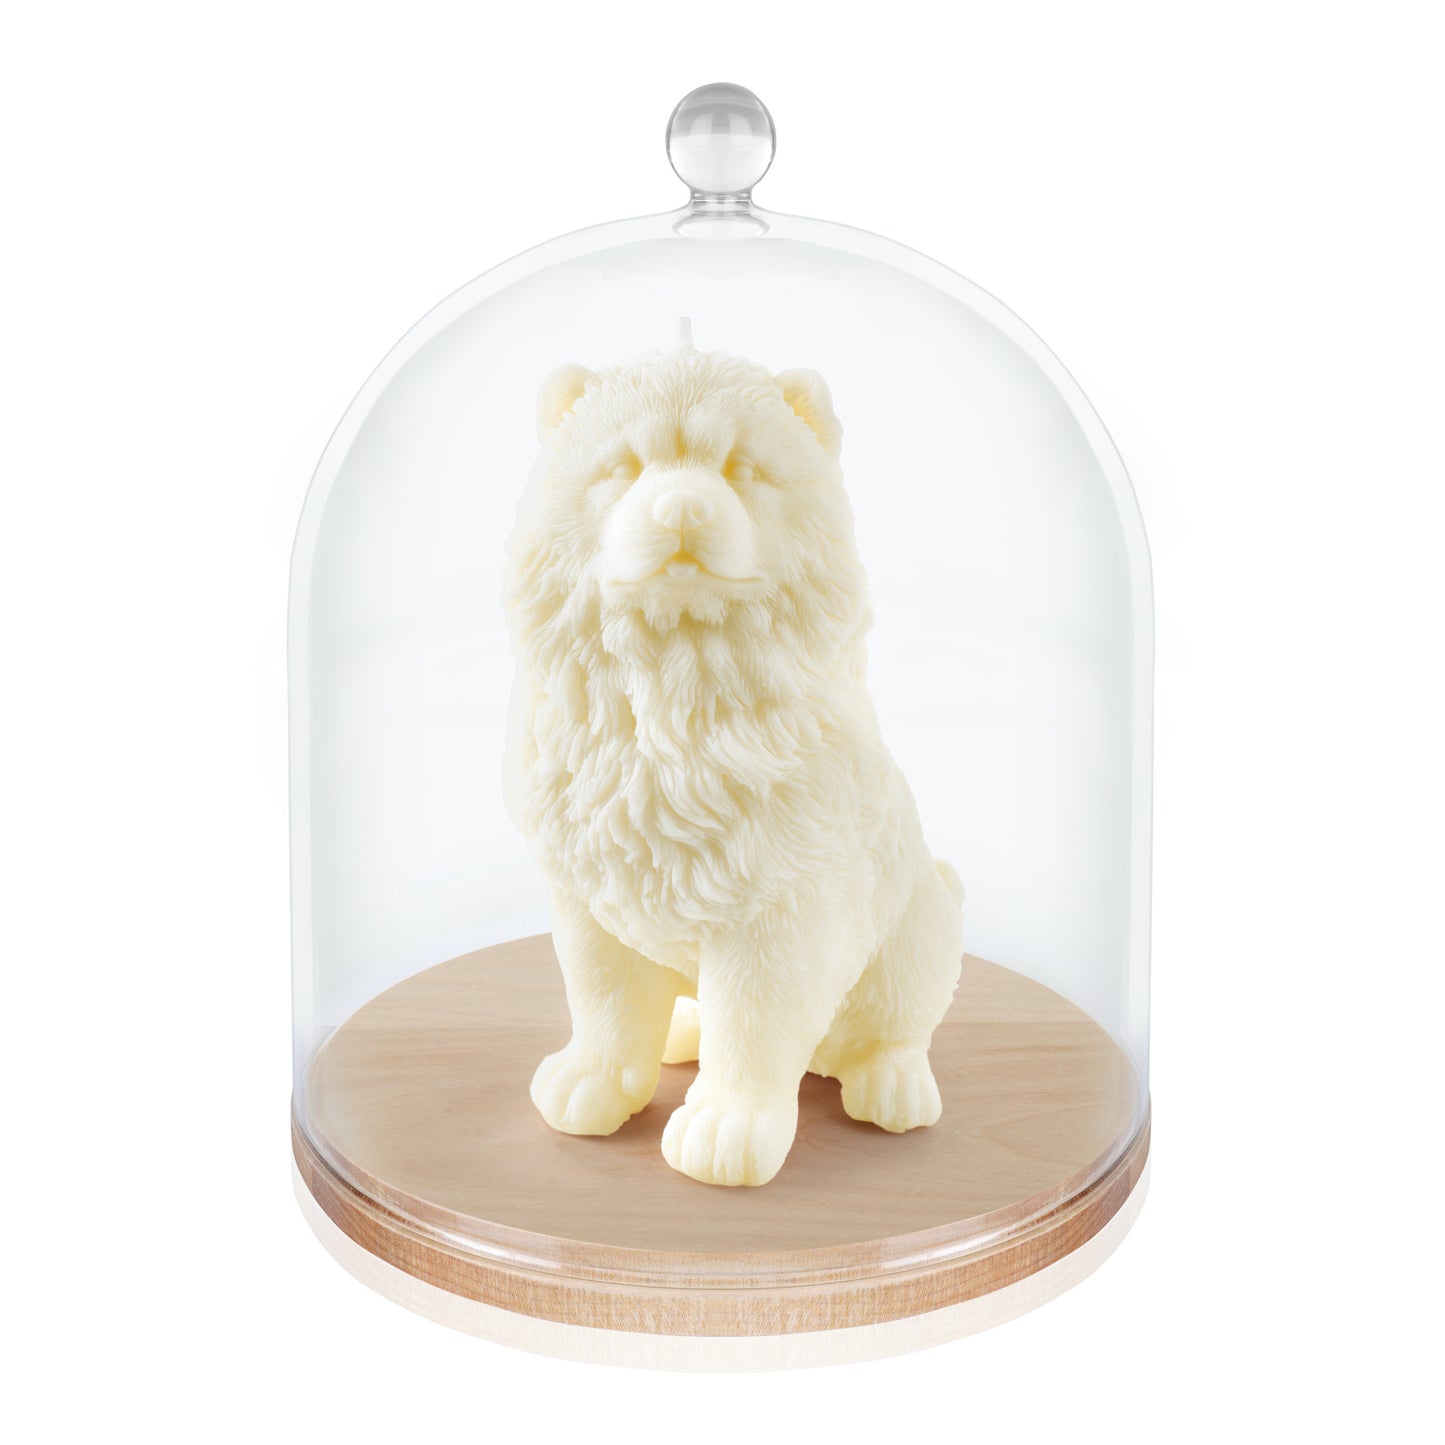 The Chow Chow Candle